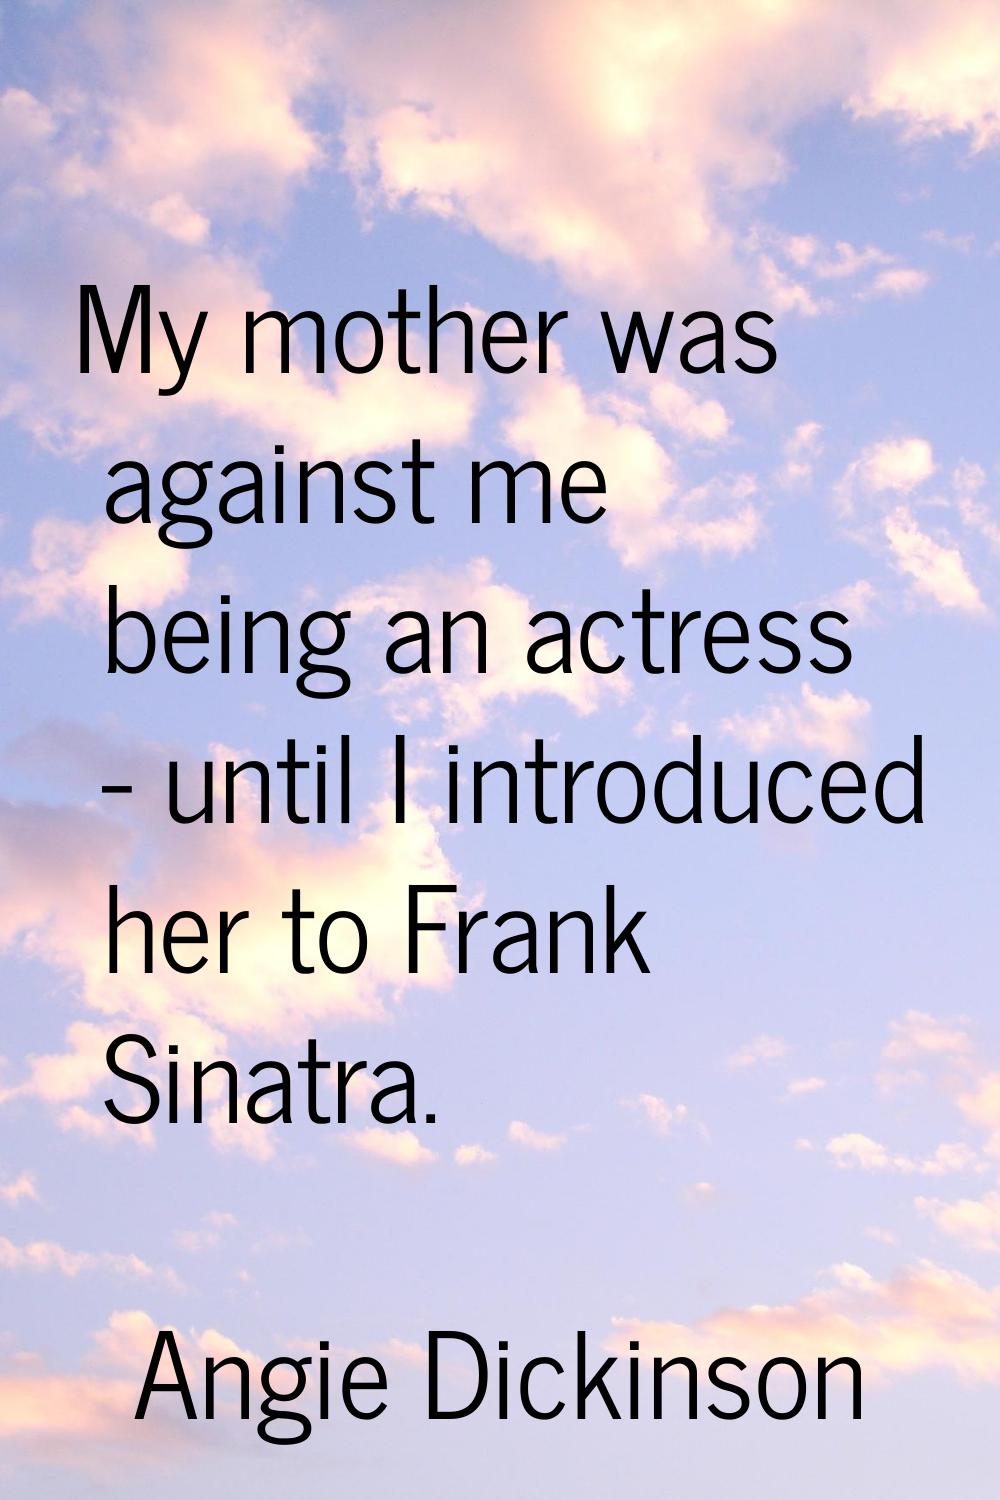 My mother was against me being an actress - until I introduced her to Frank Sinatra.